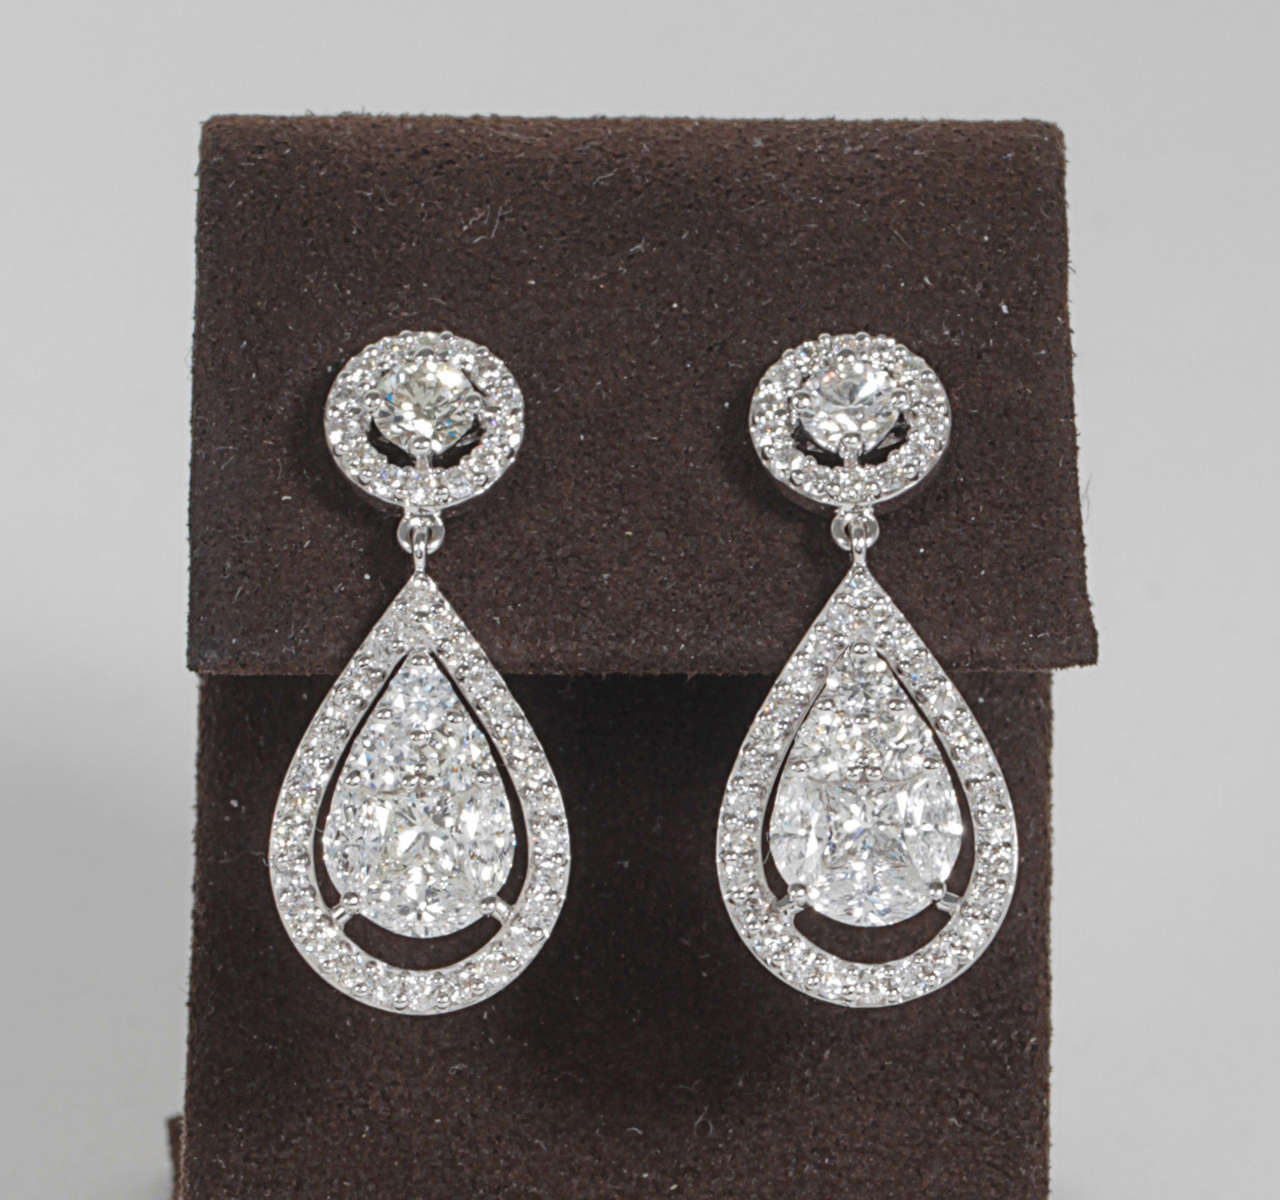 3.55 carats of exquisitely cut diamonds set in 18k white gold.

The round brilliant tops are 1 stone, but the pear shape drop is made up of a number of special cut diamonds.

Beautifully designed -- manufactured in Italy.